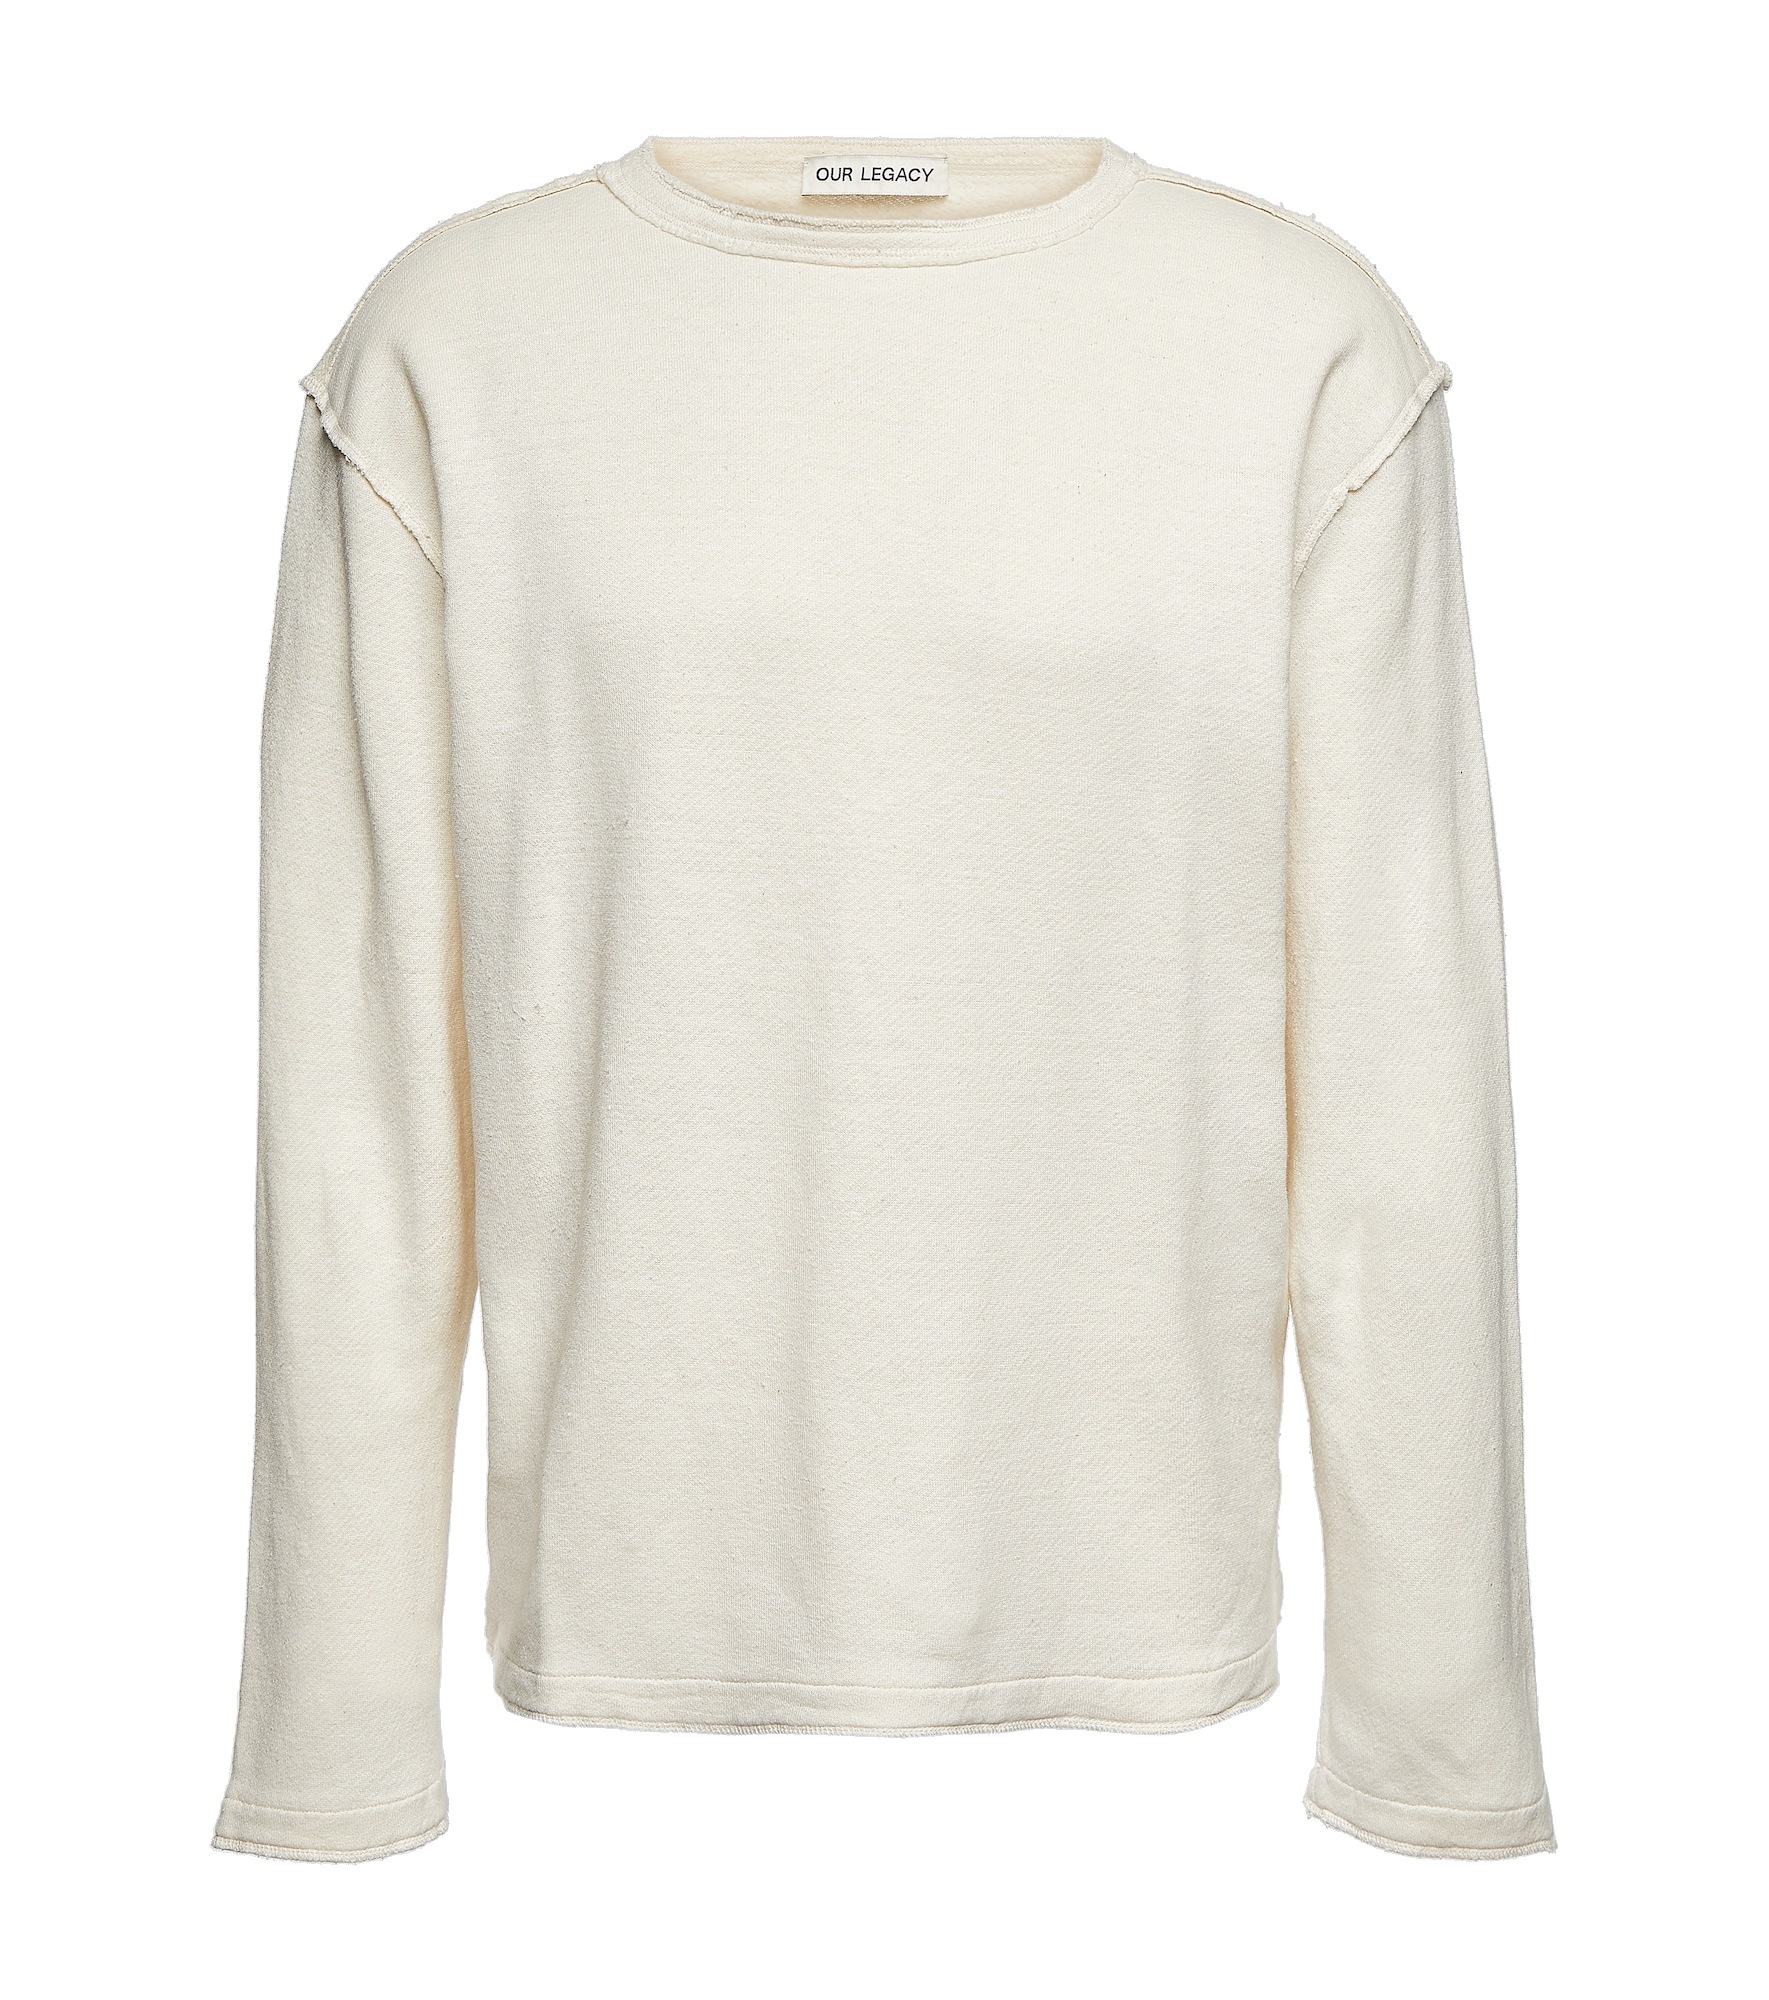 Our Legacy - Inverted hemp and cotton sweatshirt Our Legacy